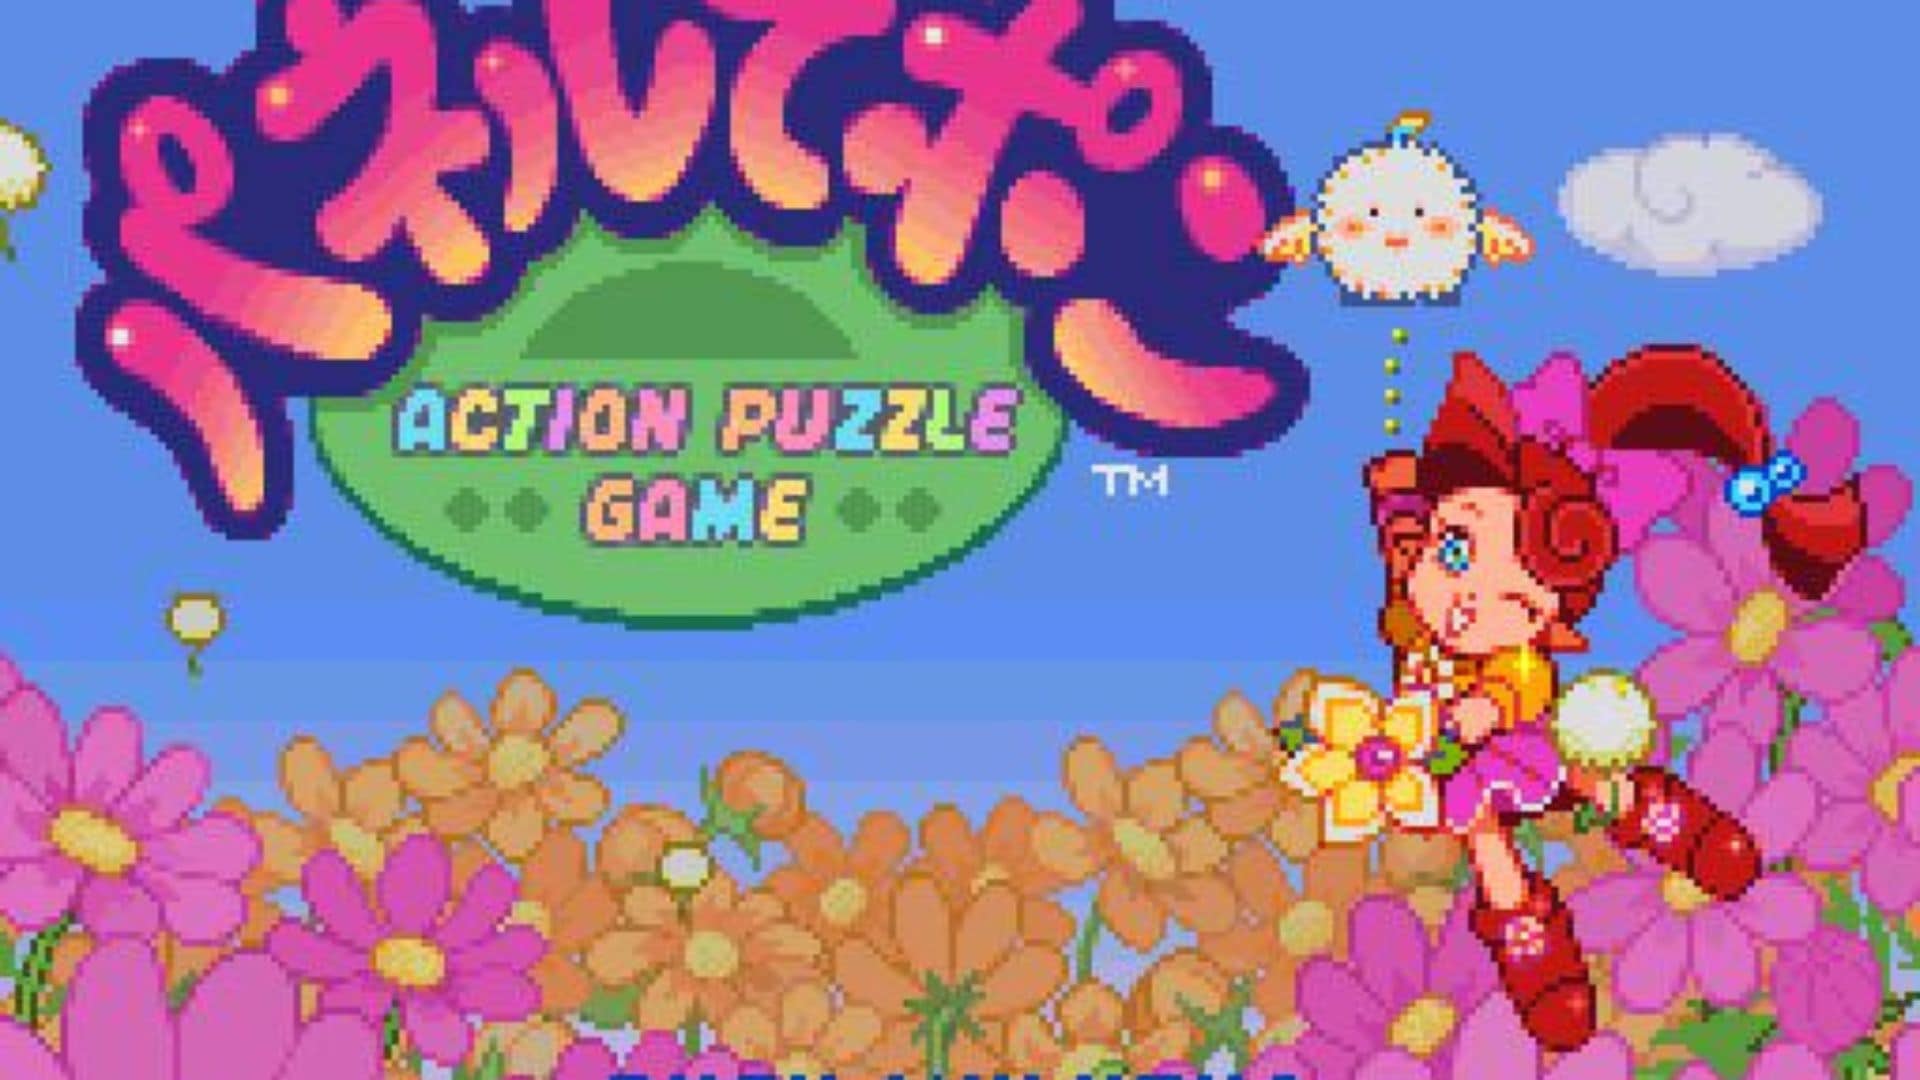 Panel de Pon title screen featuring a little red headed fairy surrounded by pink and orange flowers